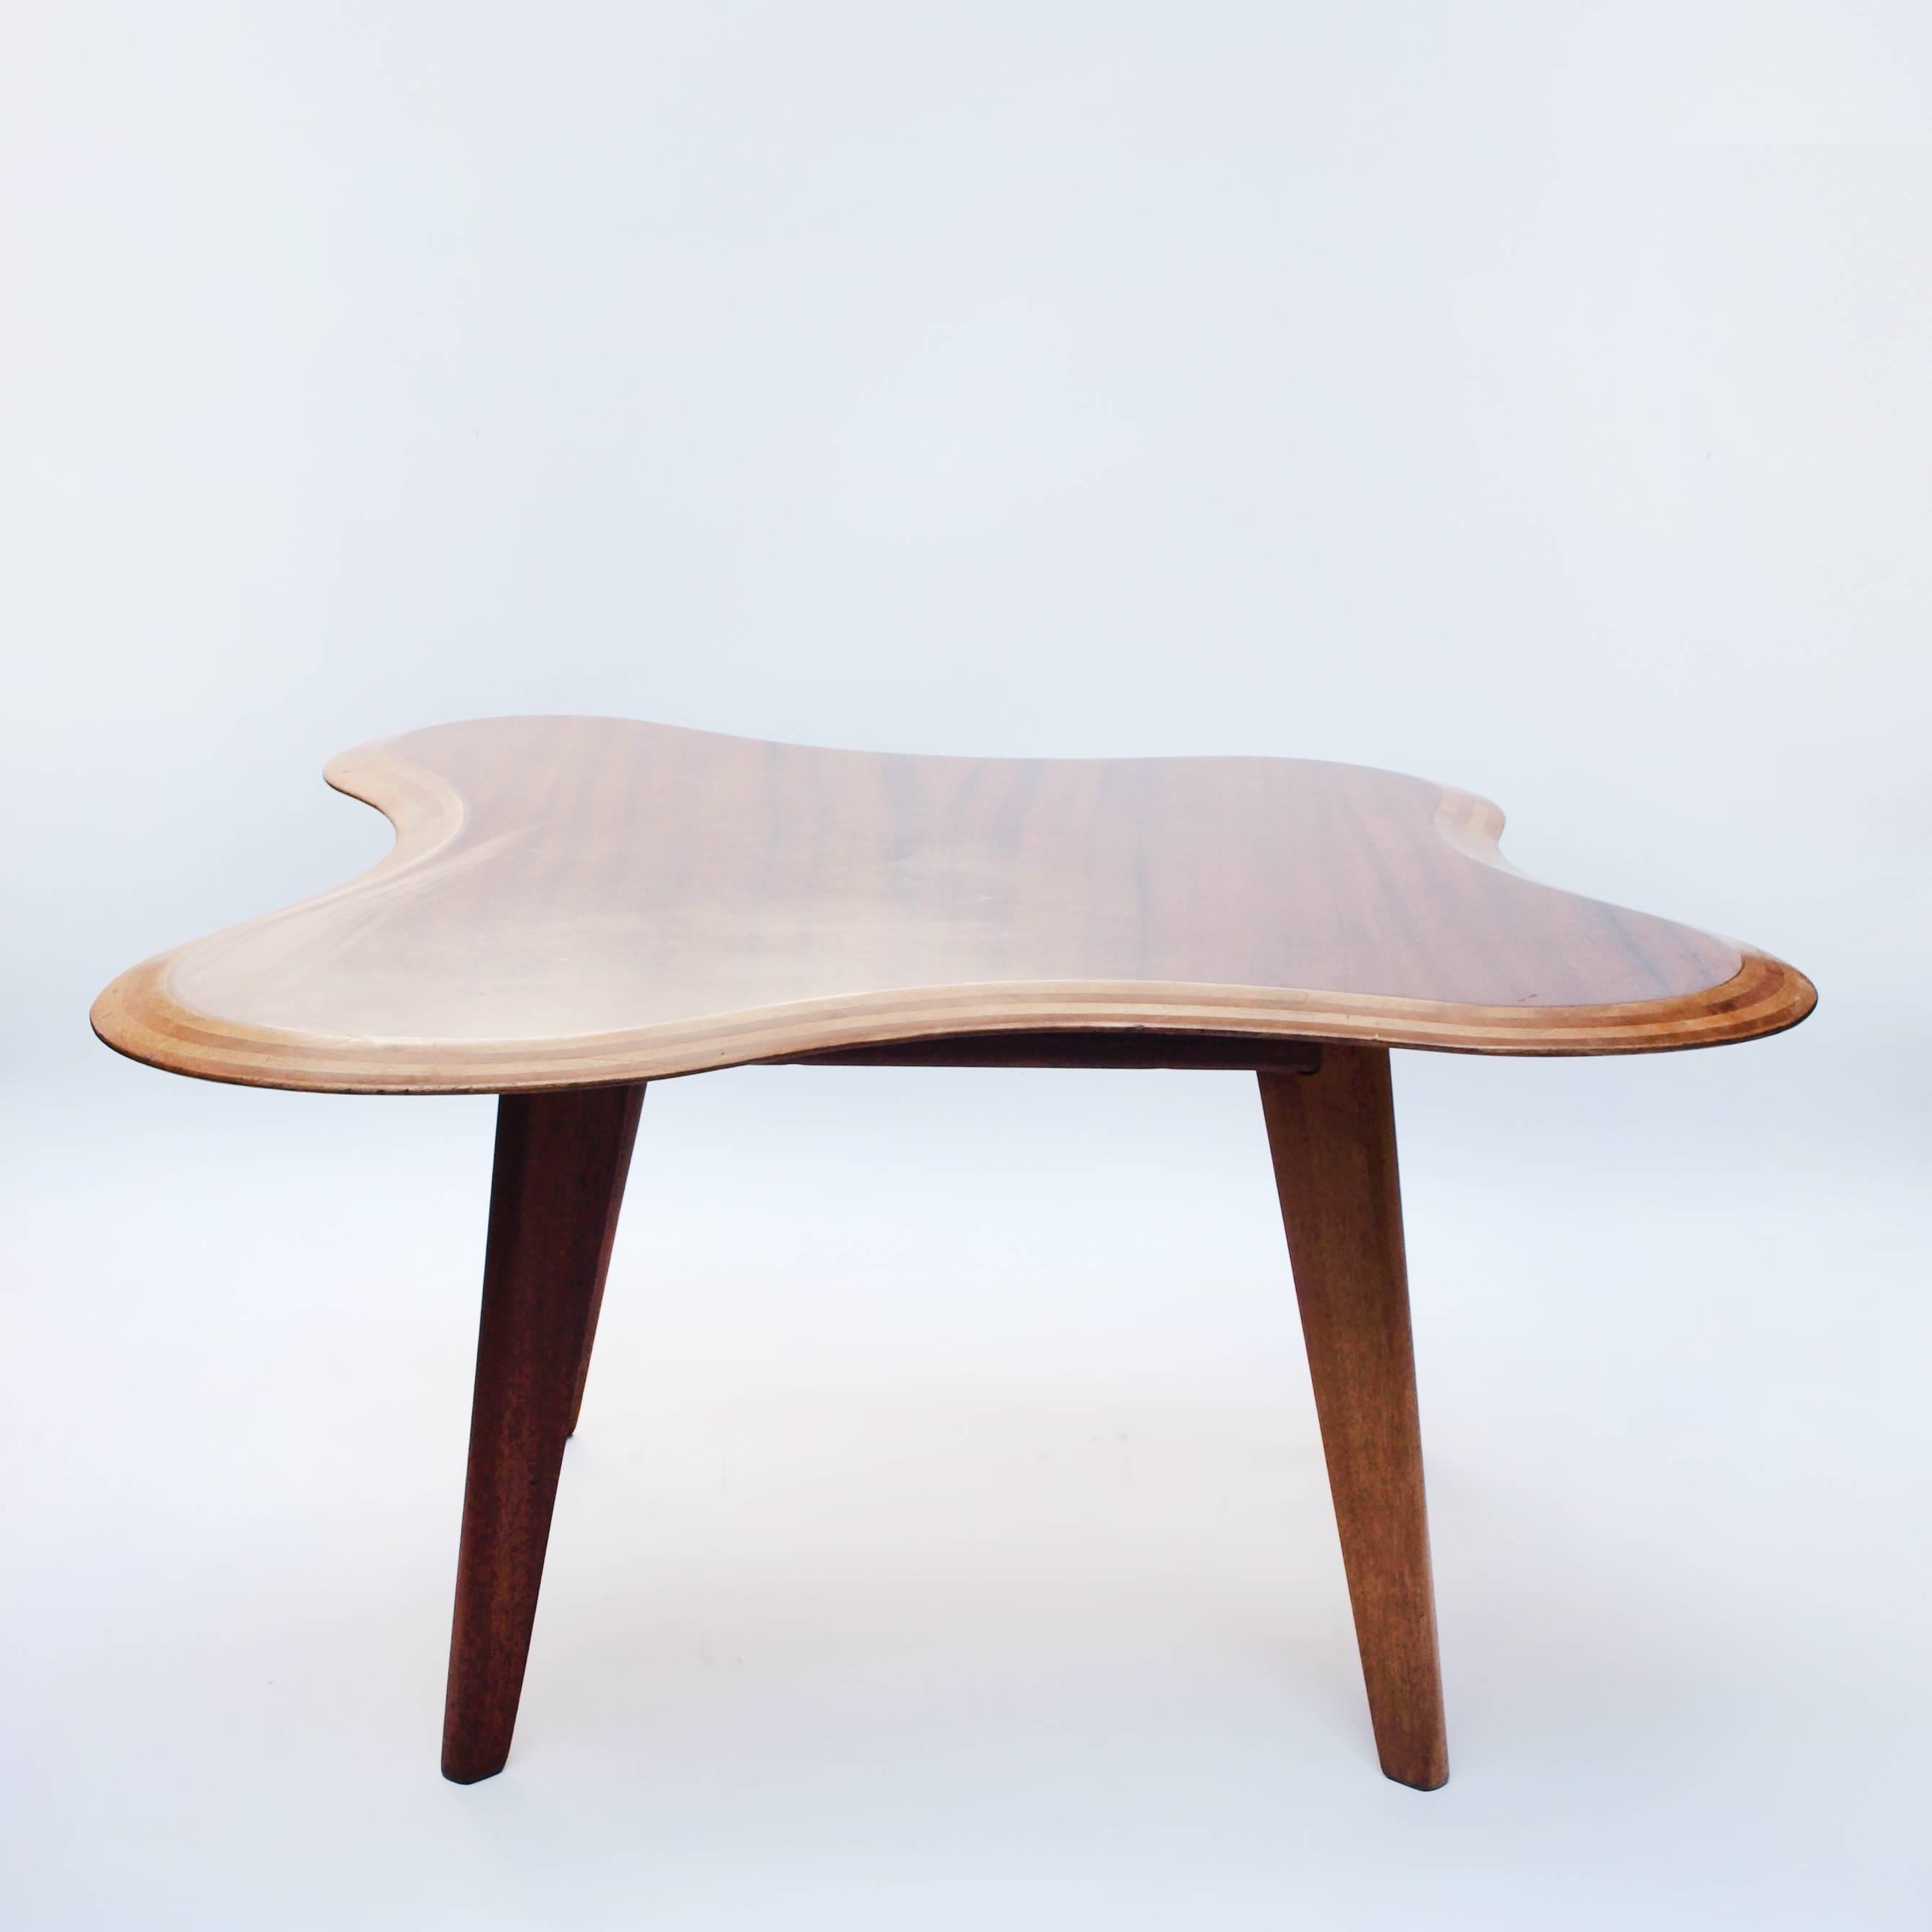 A beautifully shaped table, designed by Neil Morris for Morris & Co, Glasgow. Combining Honduras mahogany, Betula wood and curved bevelled edges which expose the striped wood lamination, circa 1950.


 